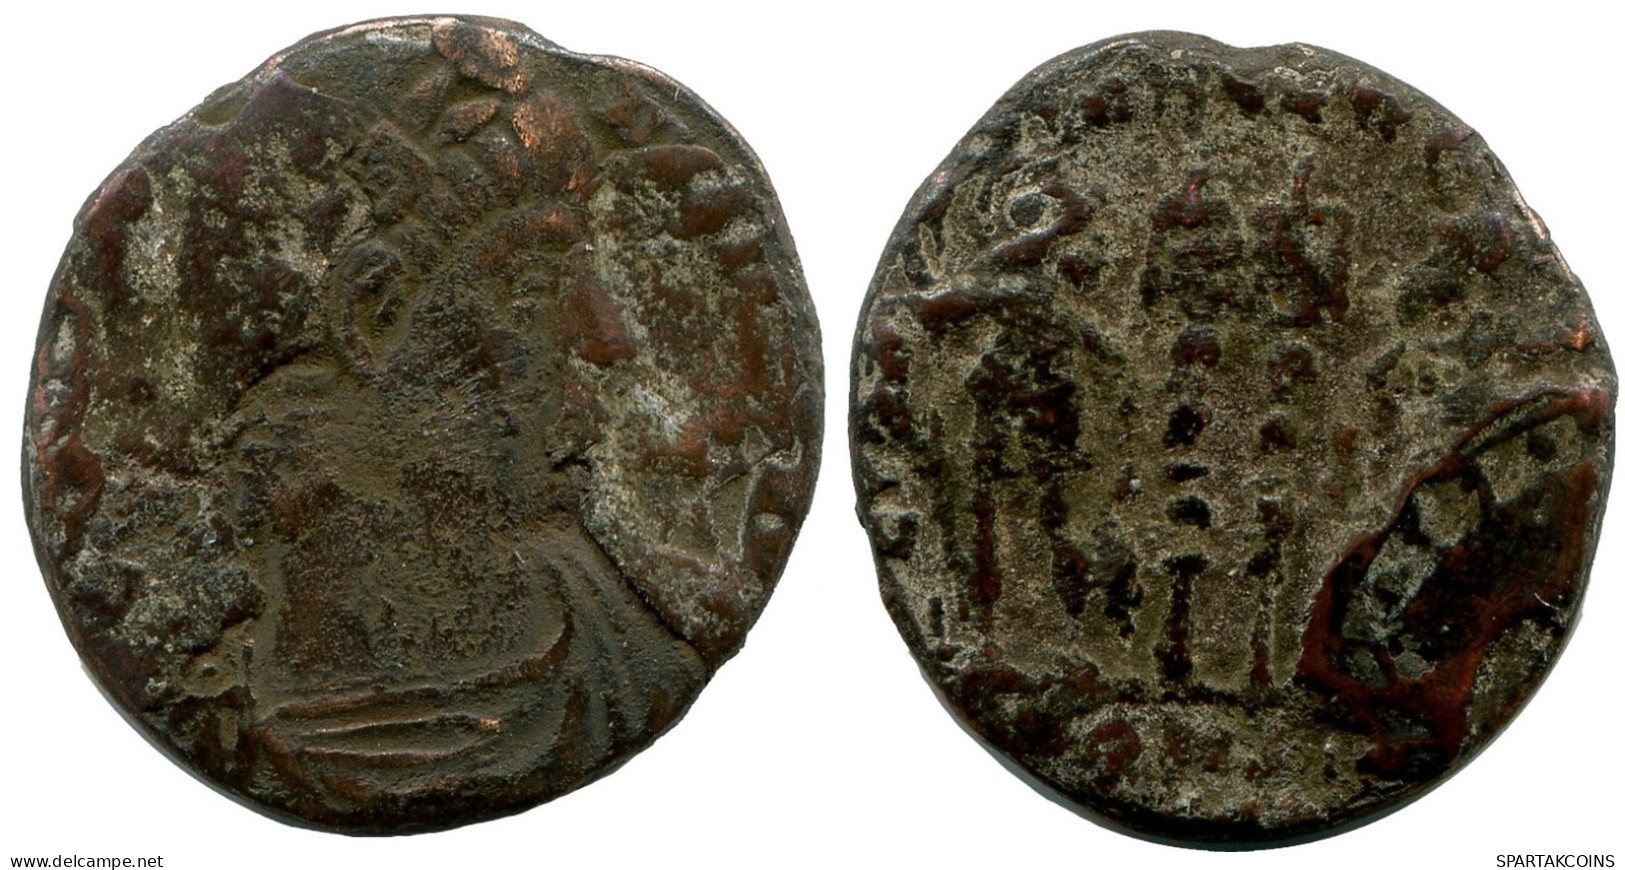 CONSTANTINE I CONSTANTINOPLE FROM THE ROYAL ONTARIO MUSEUM #ANC10815.14.U.A - El Imperio Christiano (307 / 363)